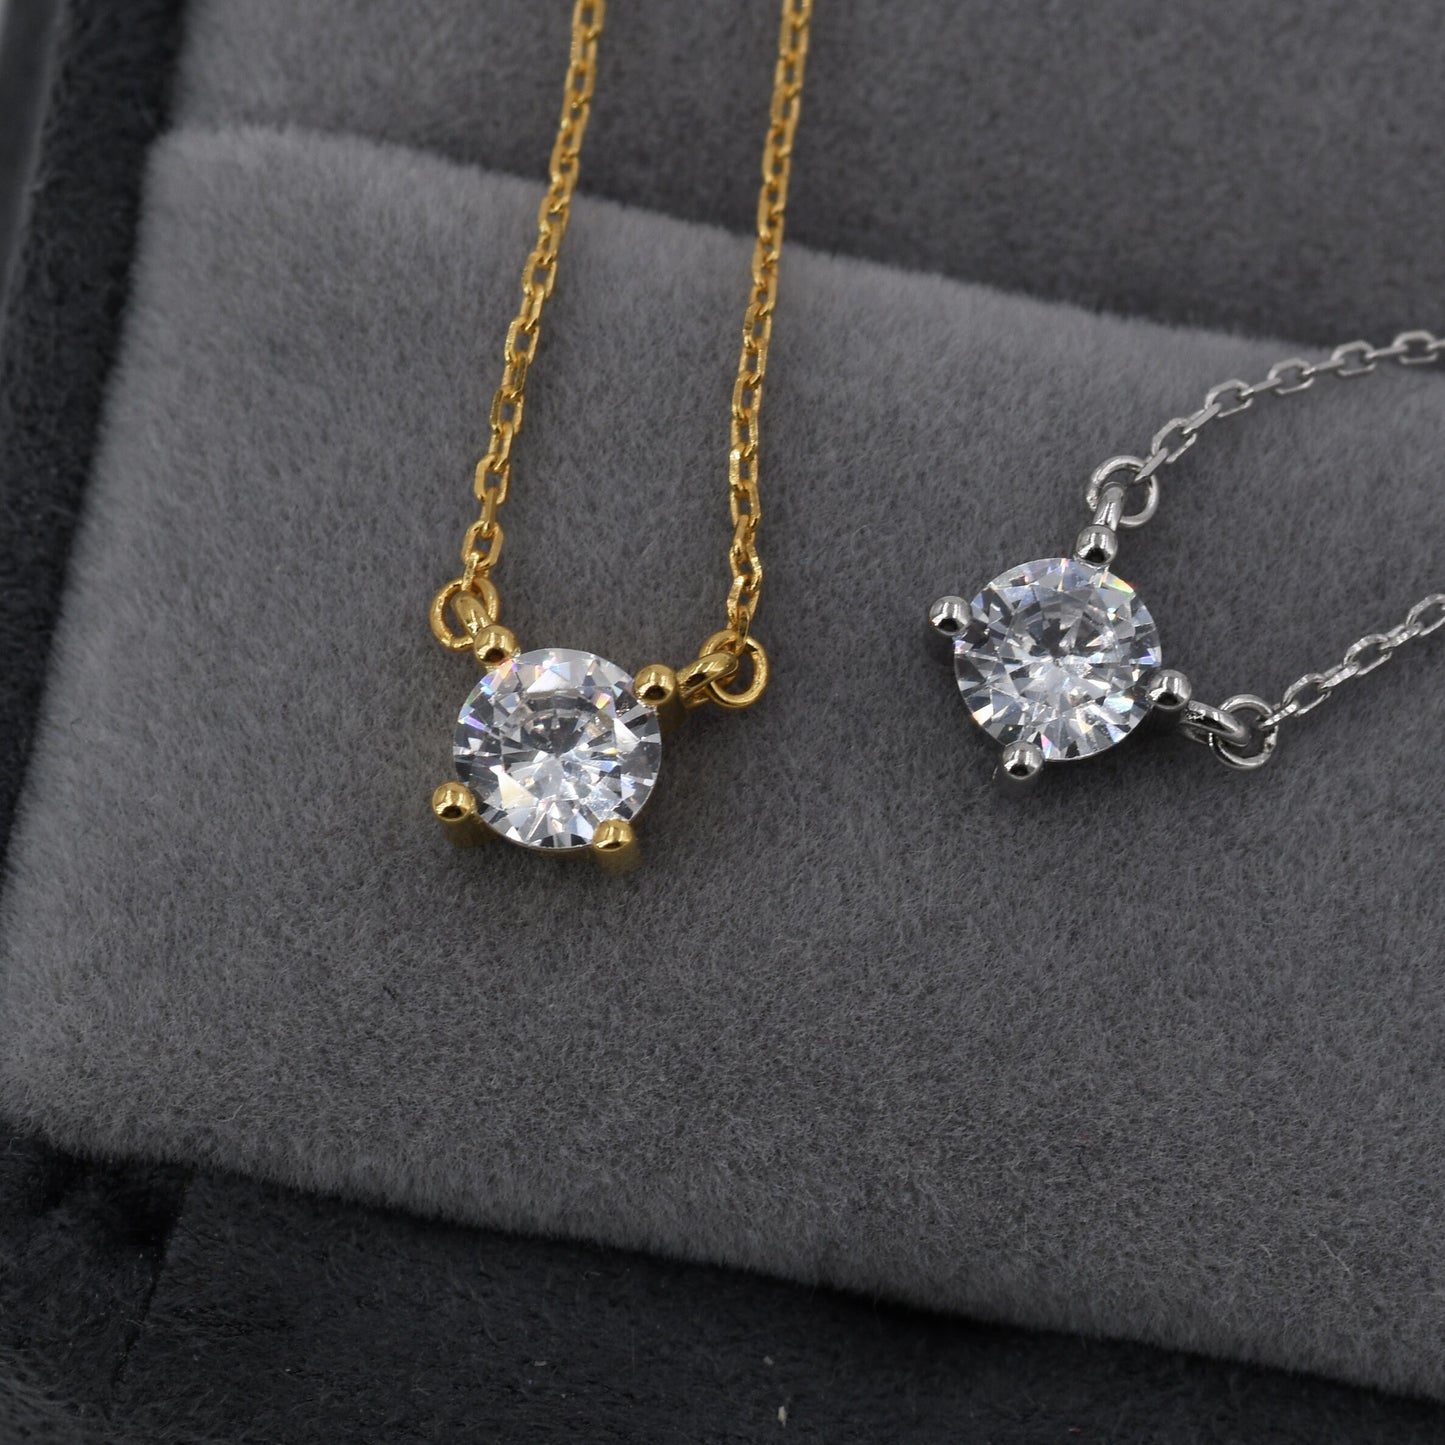 Extra Tiny CZ Necklace in Sterling Silver, Silver or Gold, Diamond Cut CZ Pendant Necklace